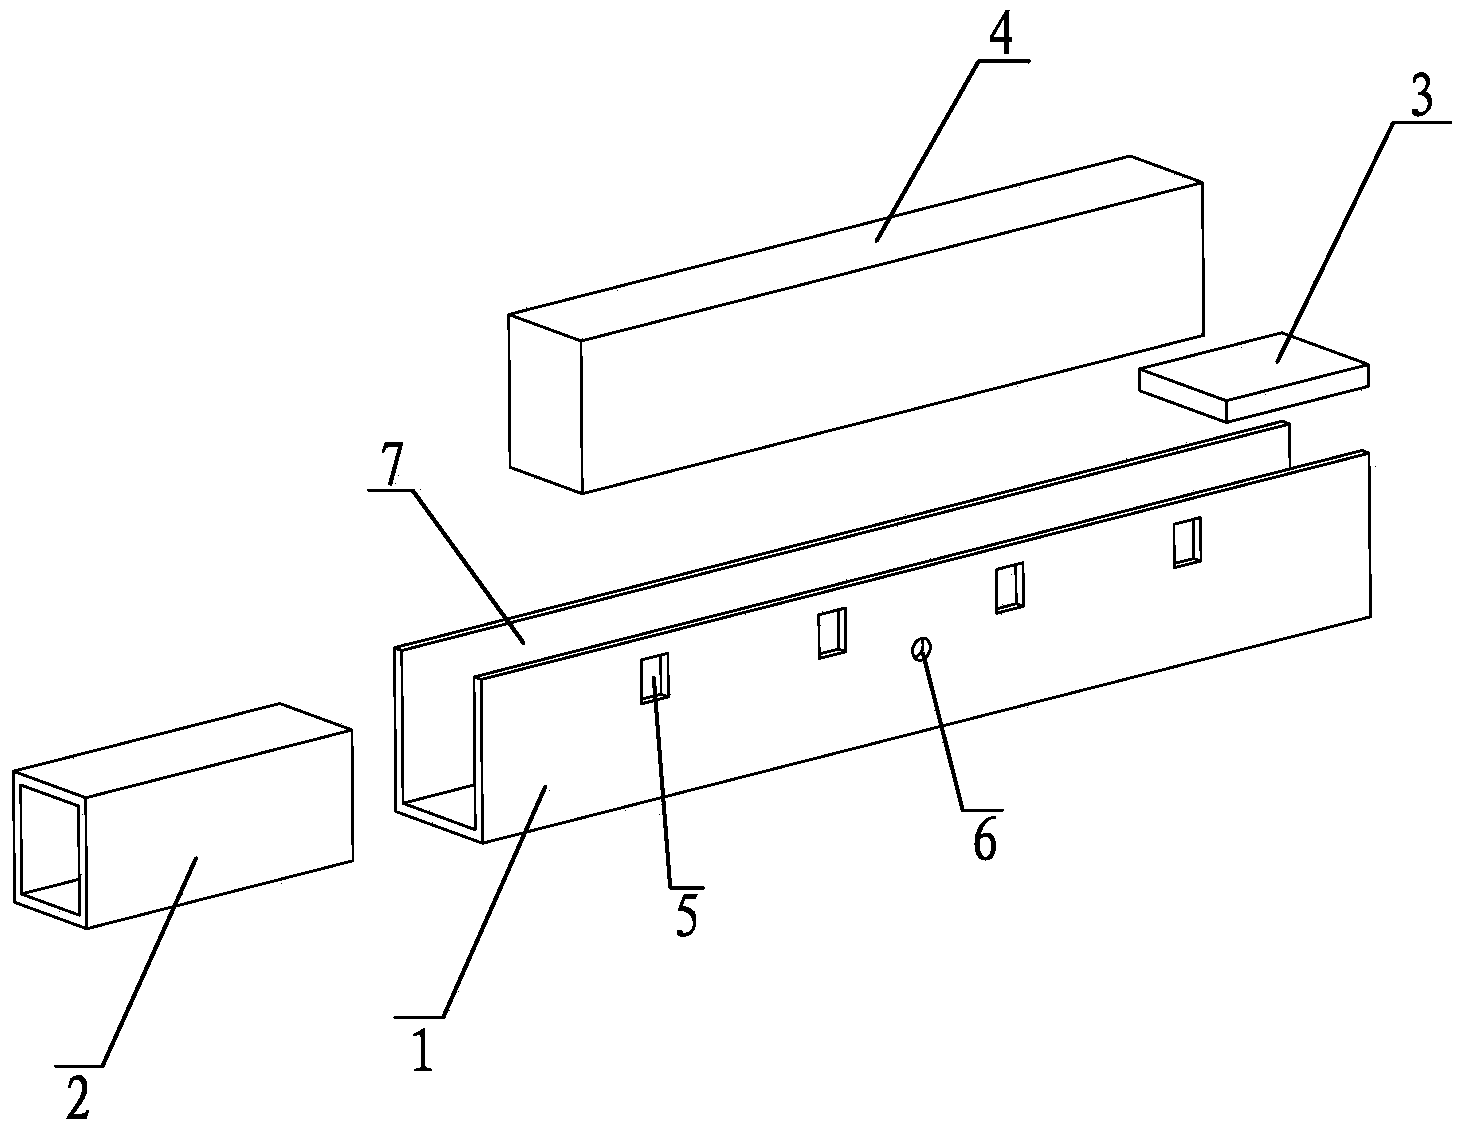 Timber component composed of steel and wood